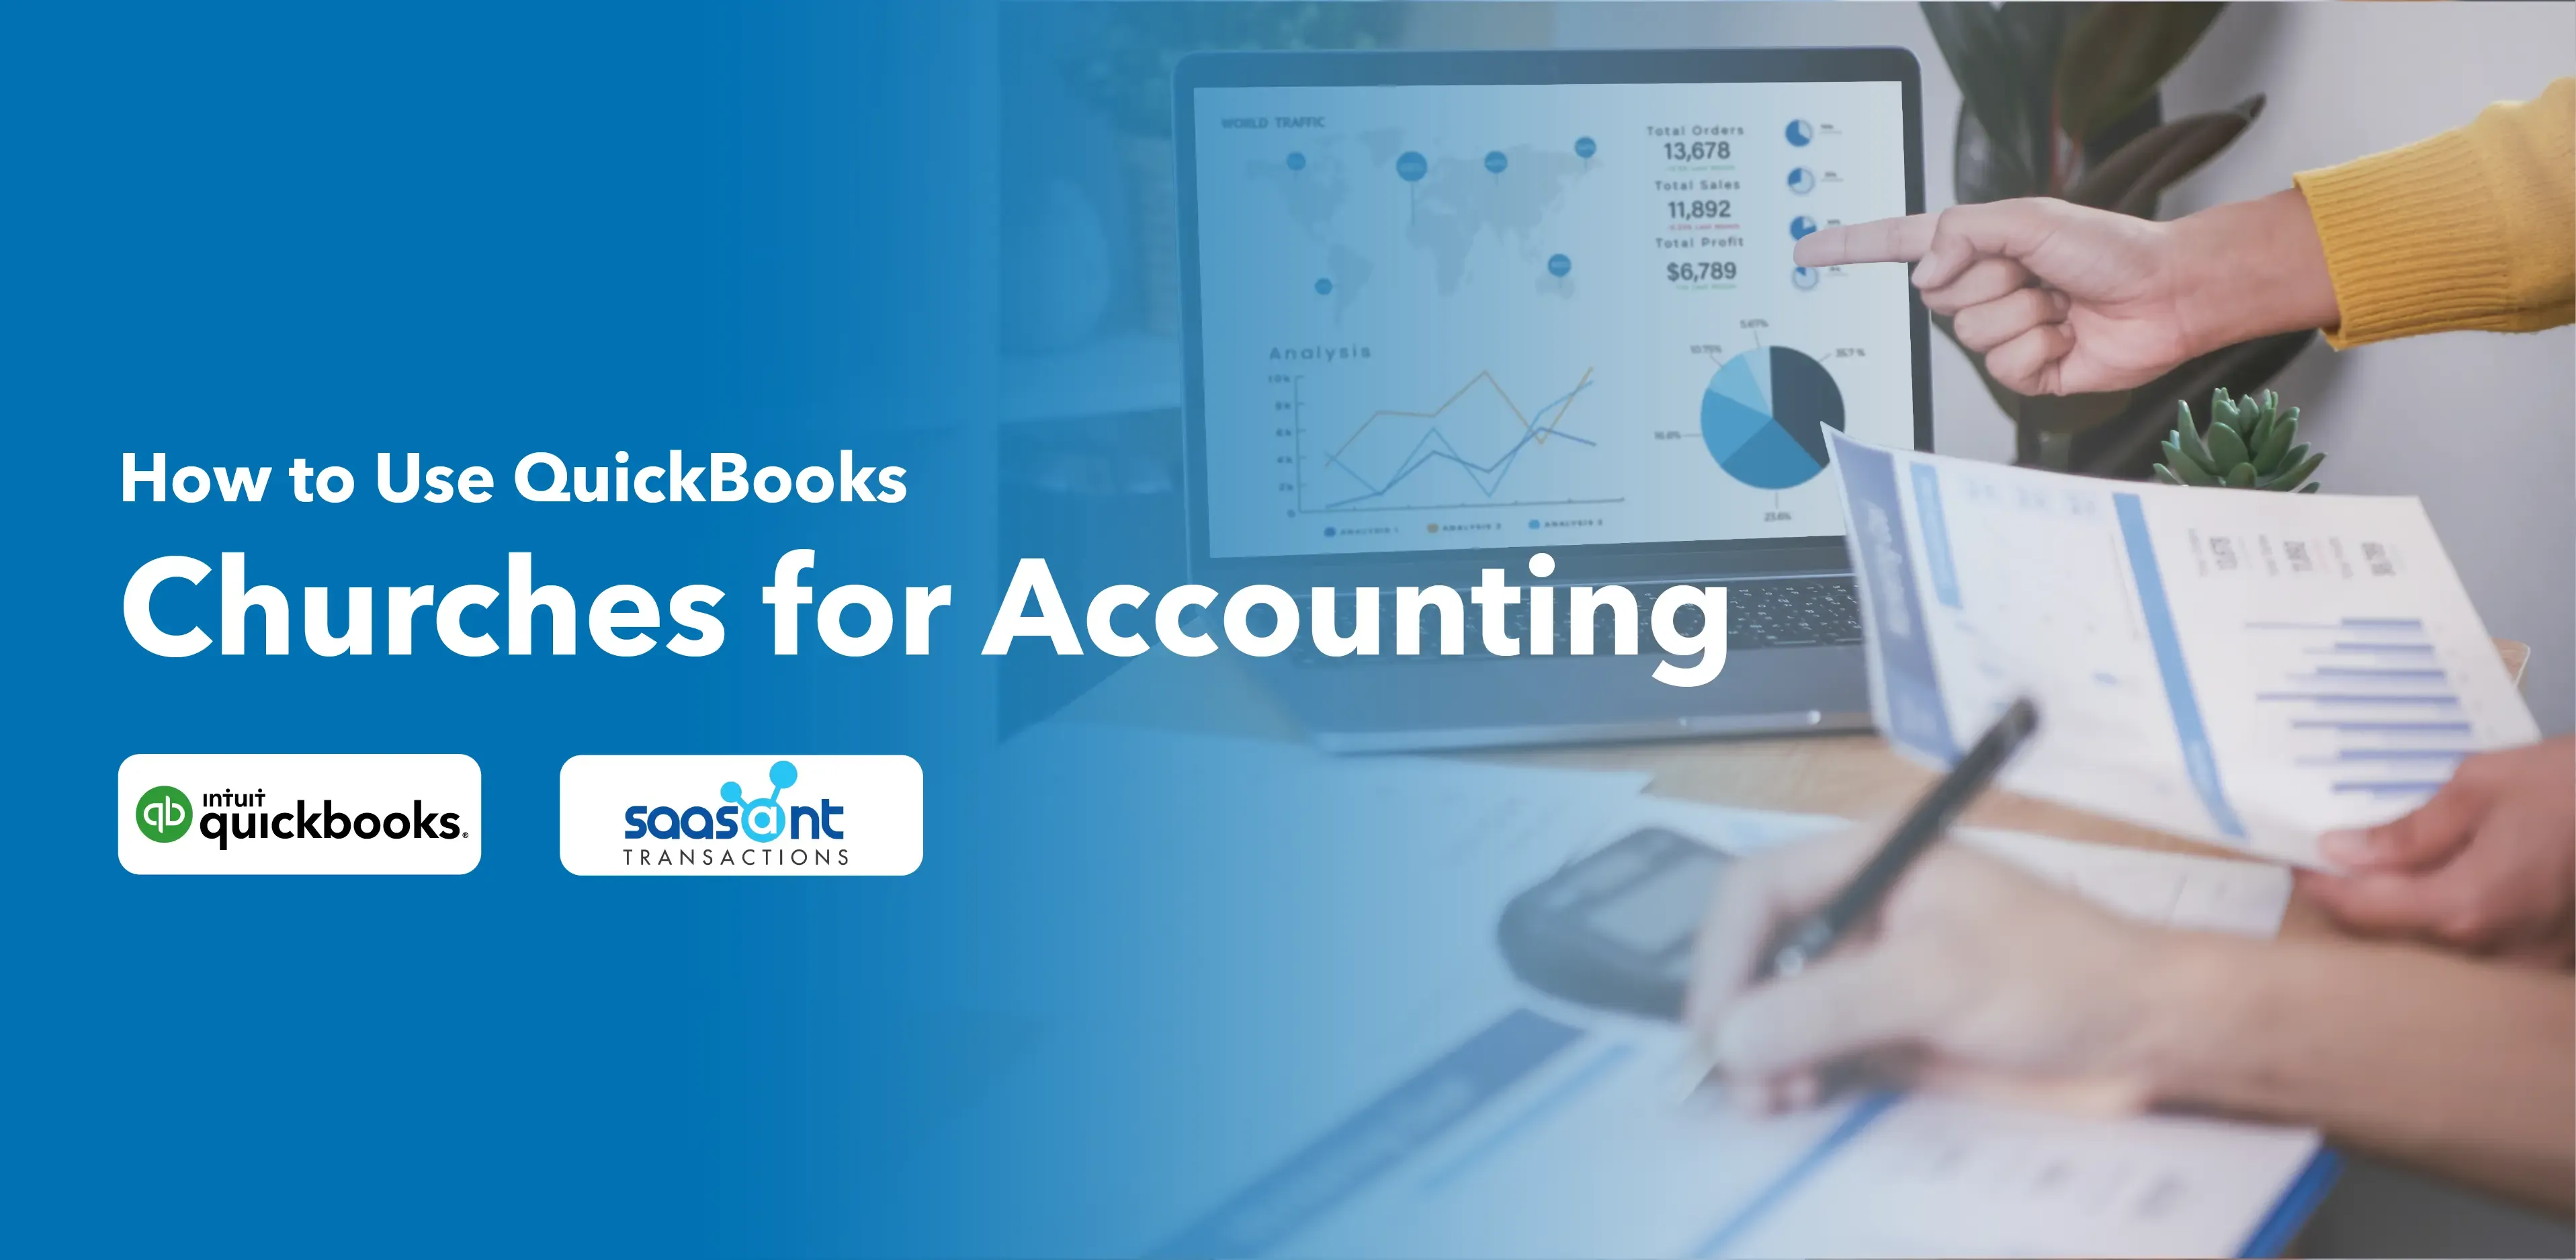 blog_images1703128704516_How-to-Use-QuickBooks-Churches-for-Accounting-.webp